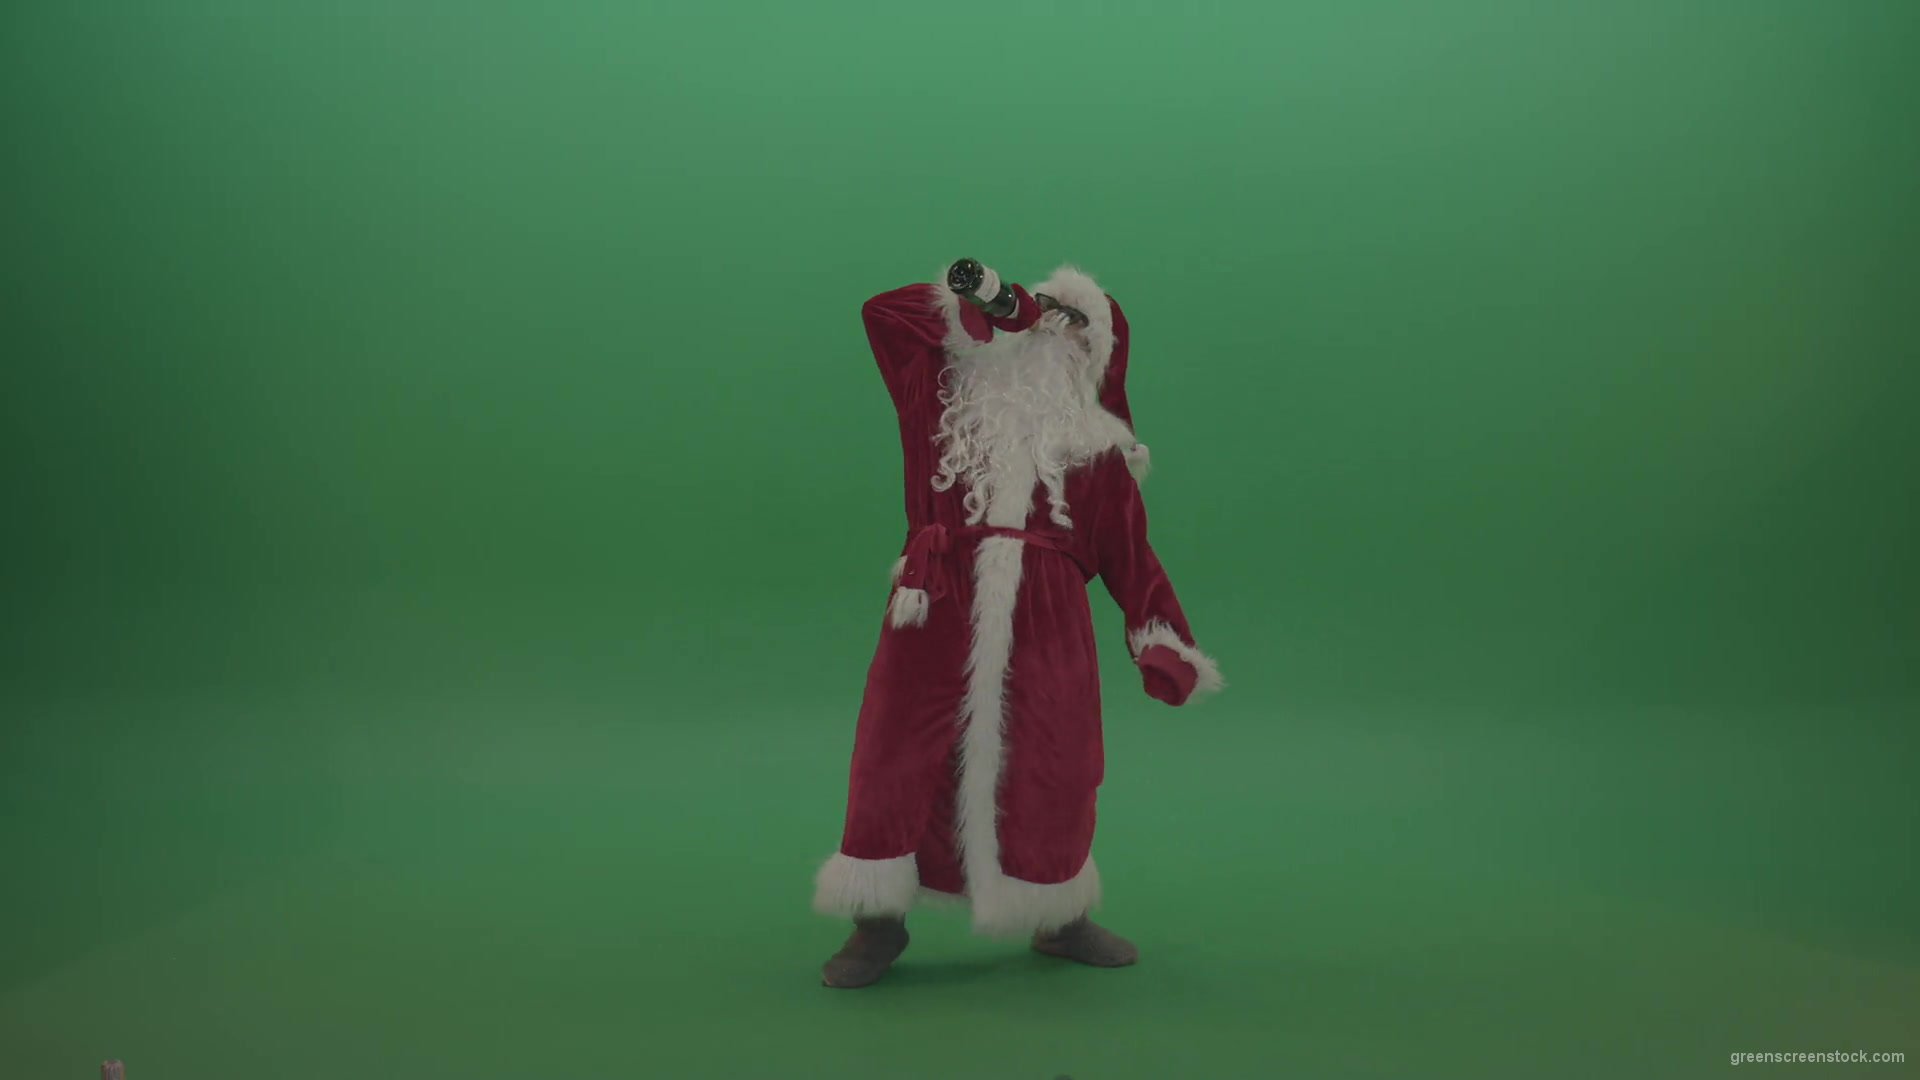 Drunk-santa-in-black-glasses-with-a-bottle-of-wine-staggers-across-the-green-screen-background-1920_007 Green Screen Stock